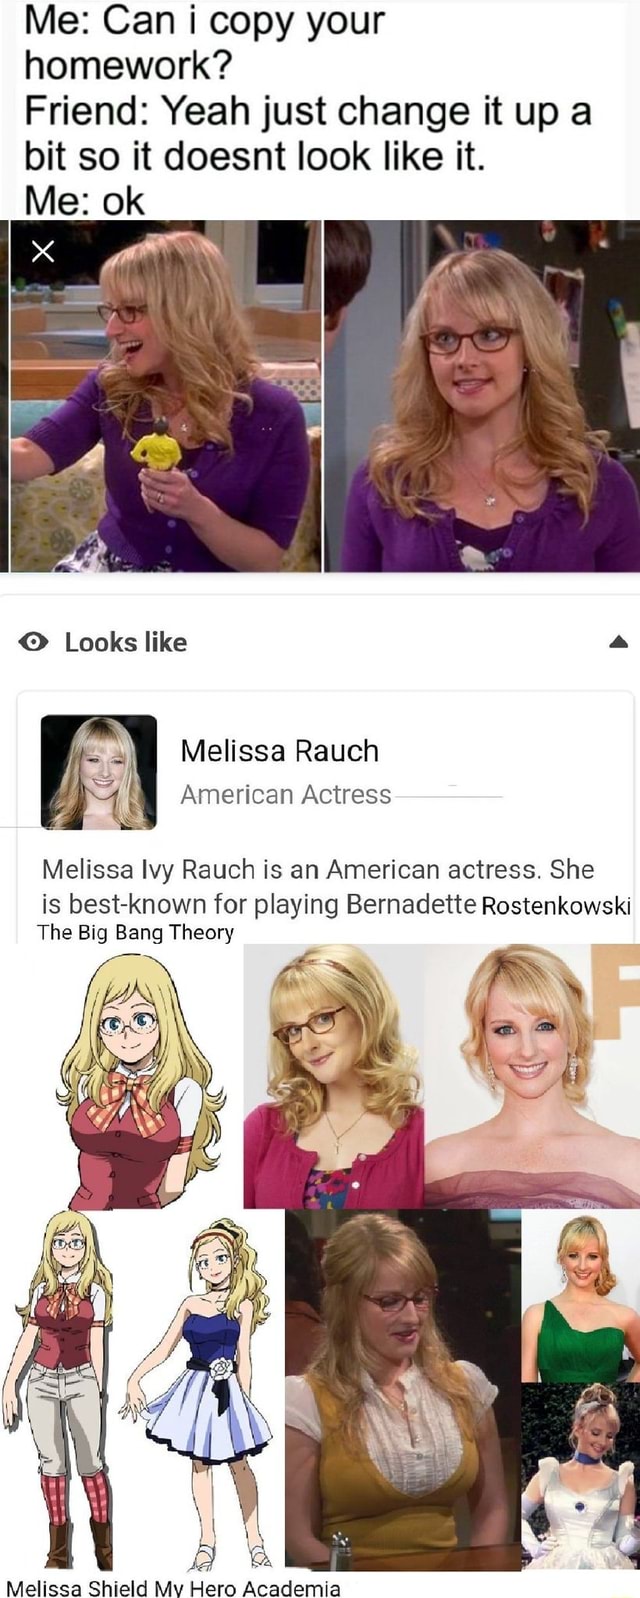 Melissa Rauch Strapon Porn - Me: Can i copy your homework? Friend: Yeah just change it up a bit so it  doesnt look like it. Melissa Ivy Rauch is an American actress. She is  best-known for playing